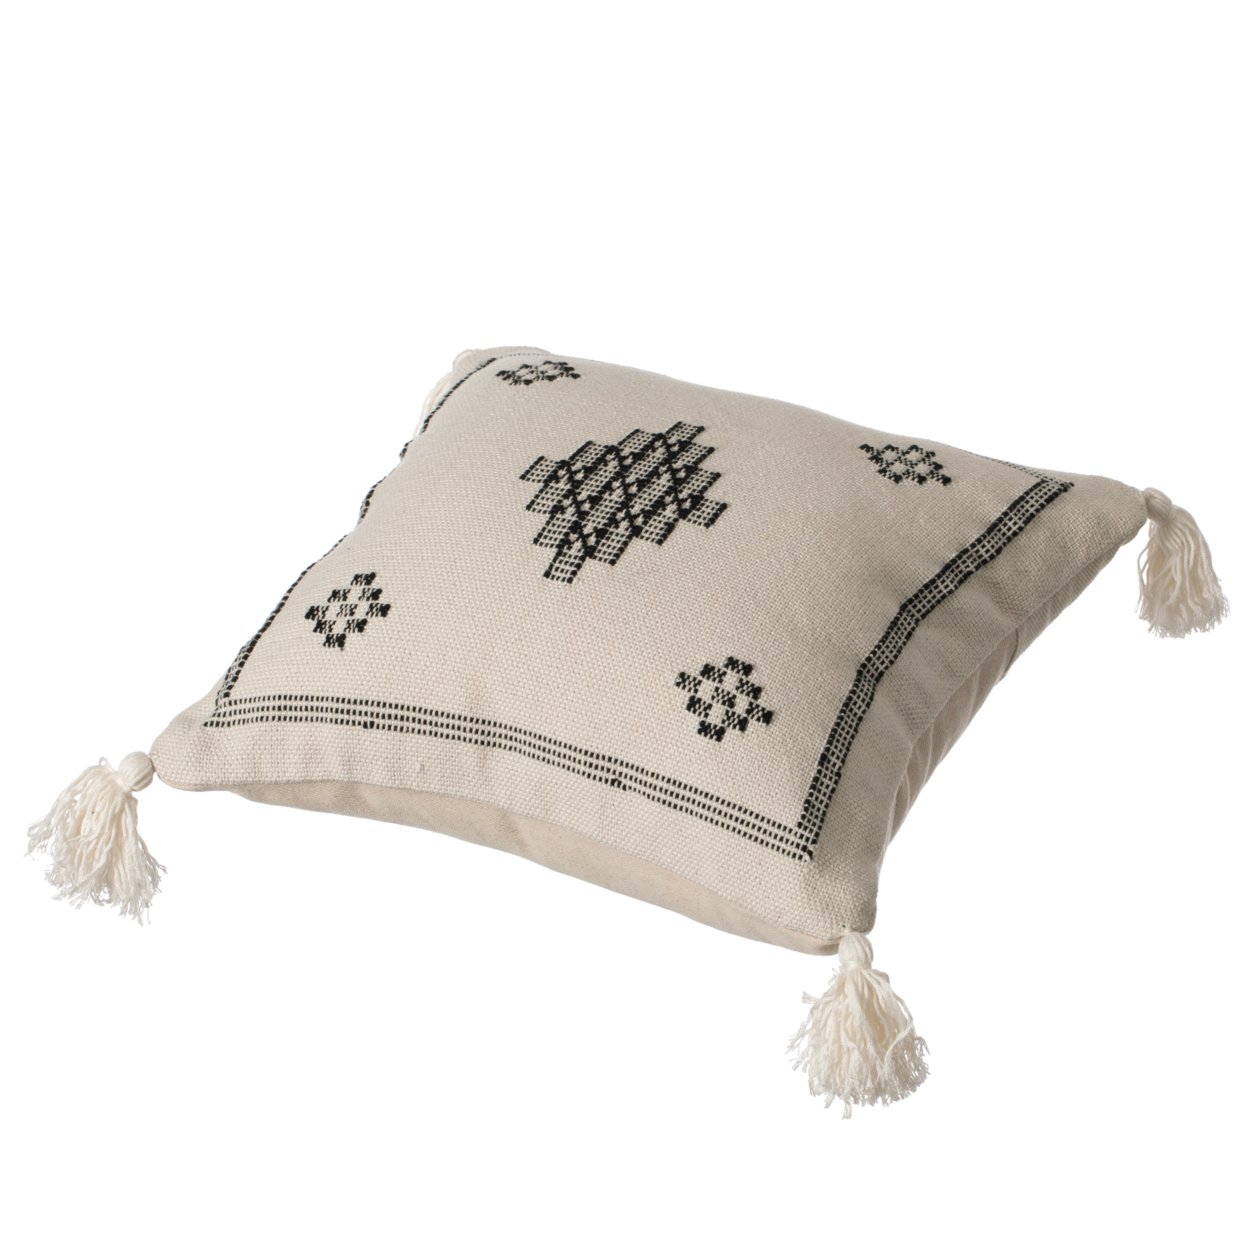 16 Throw Pillow Cover With Southwest Tribal Pattern And Corner Tassels - Black With Cushion